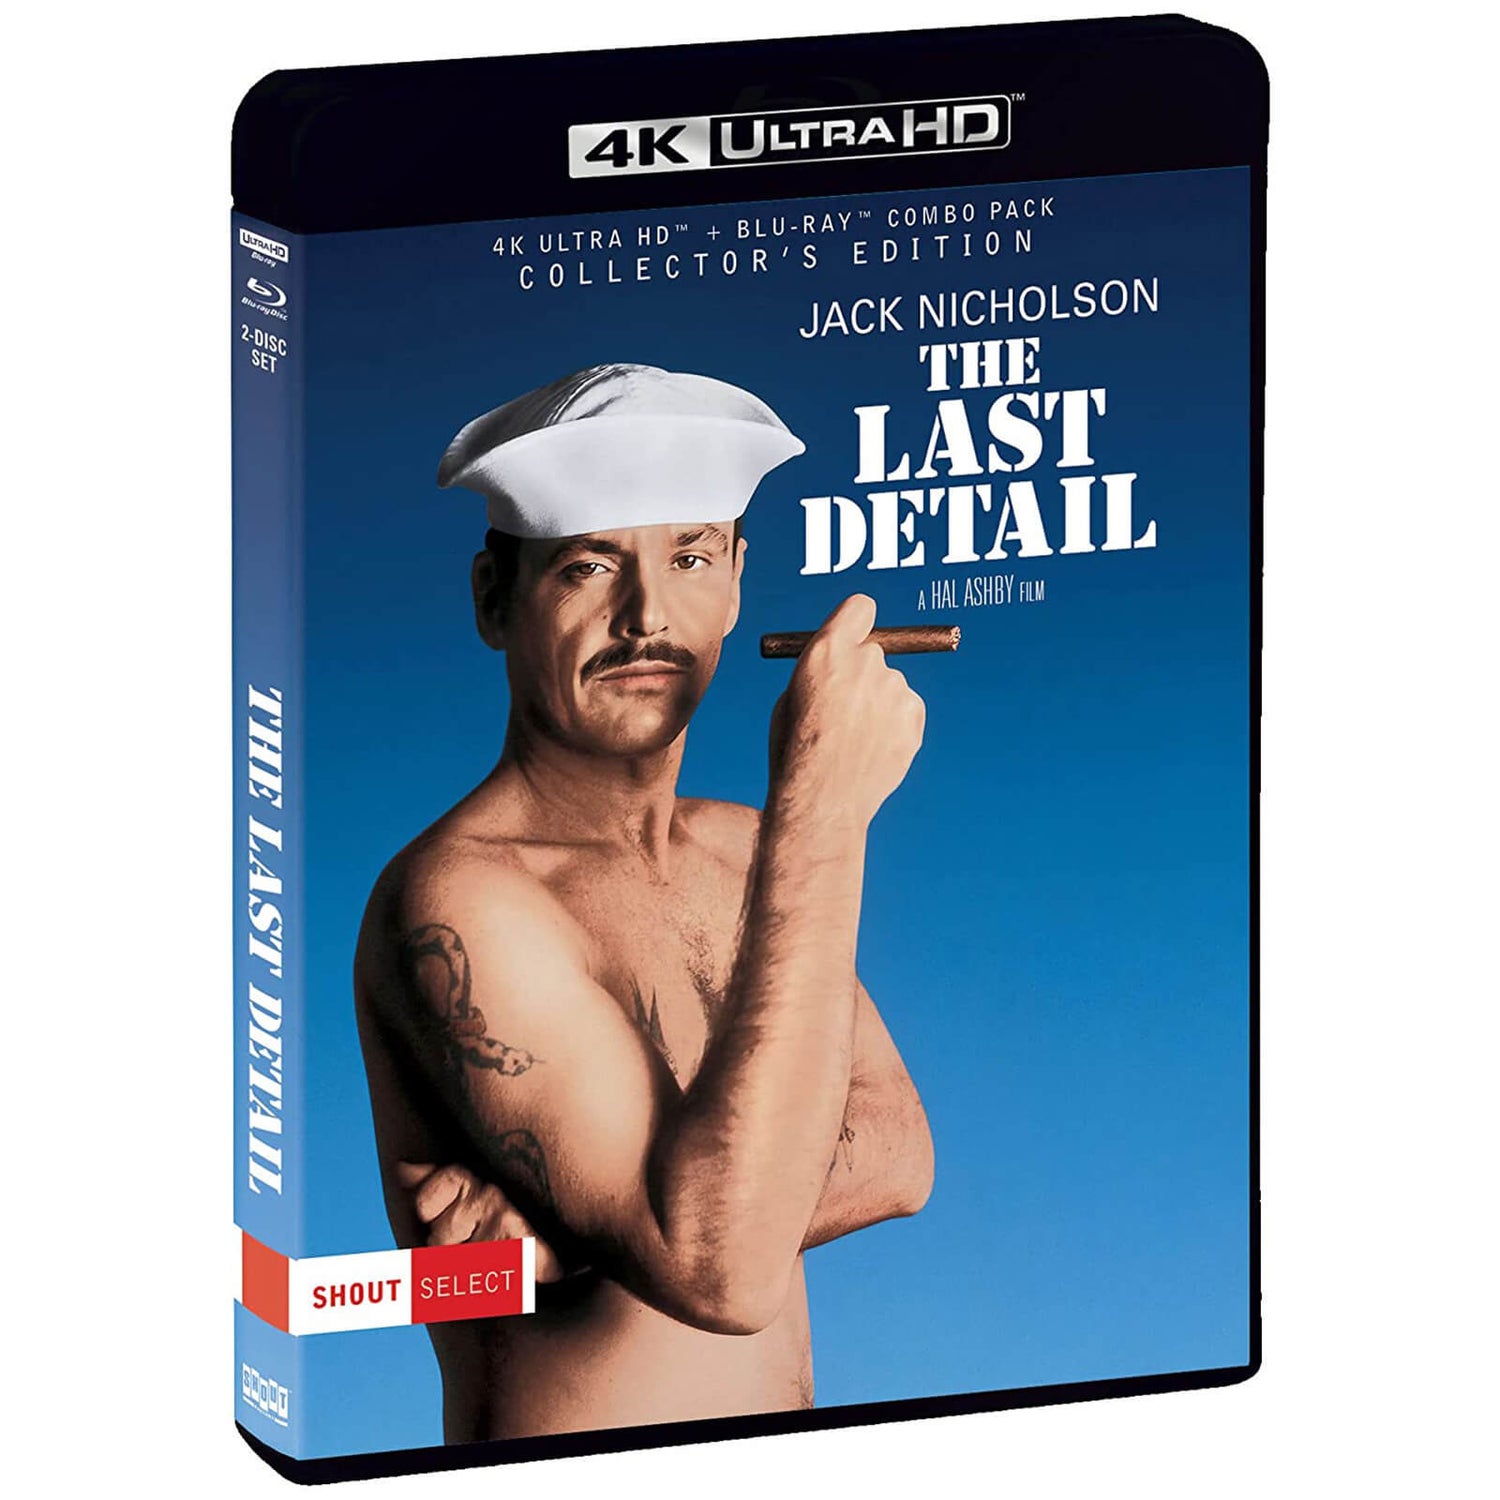 The Last Detail Collector's Edition 4K Ultra HD (Includes Blu-ray) (US Import)